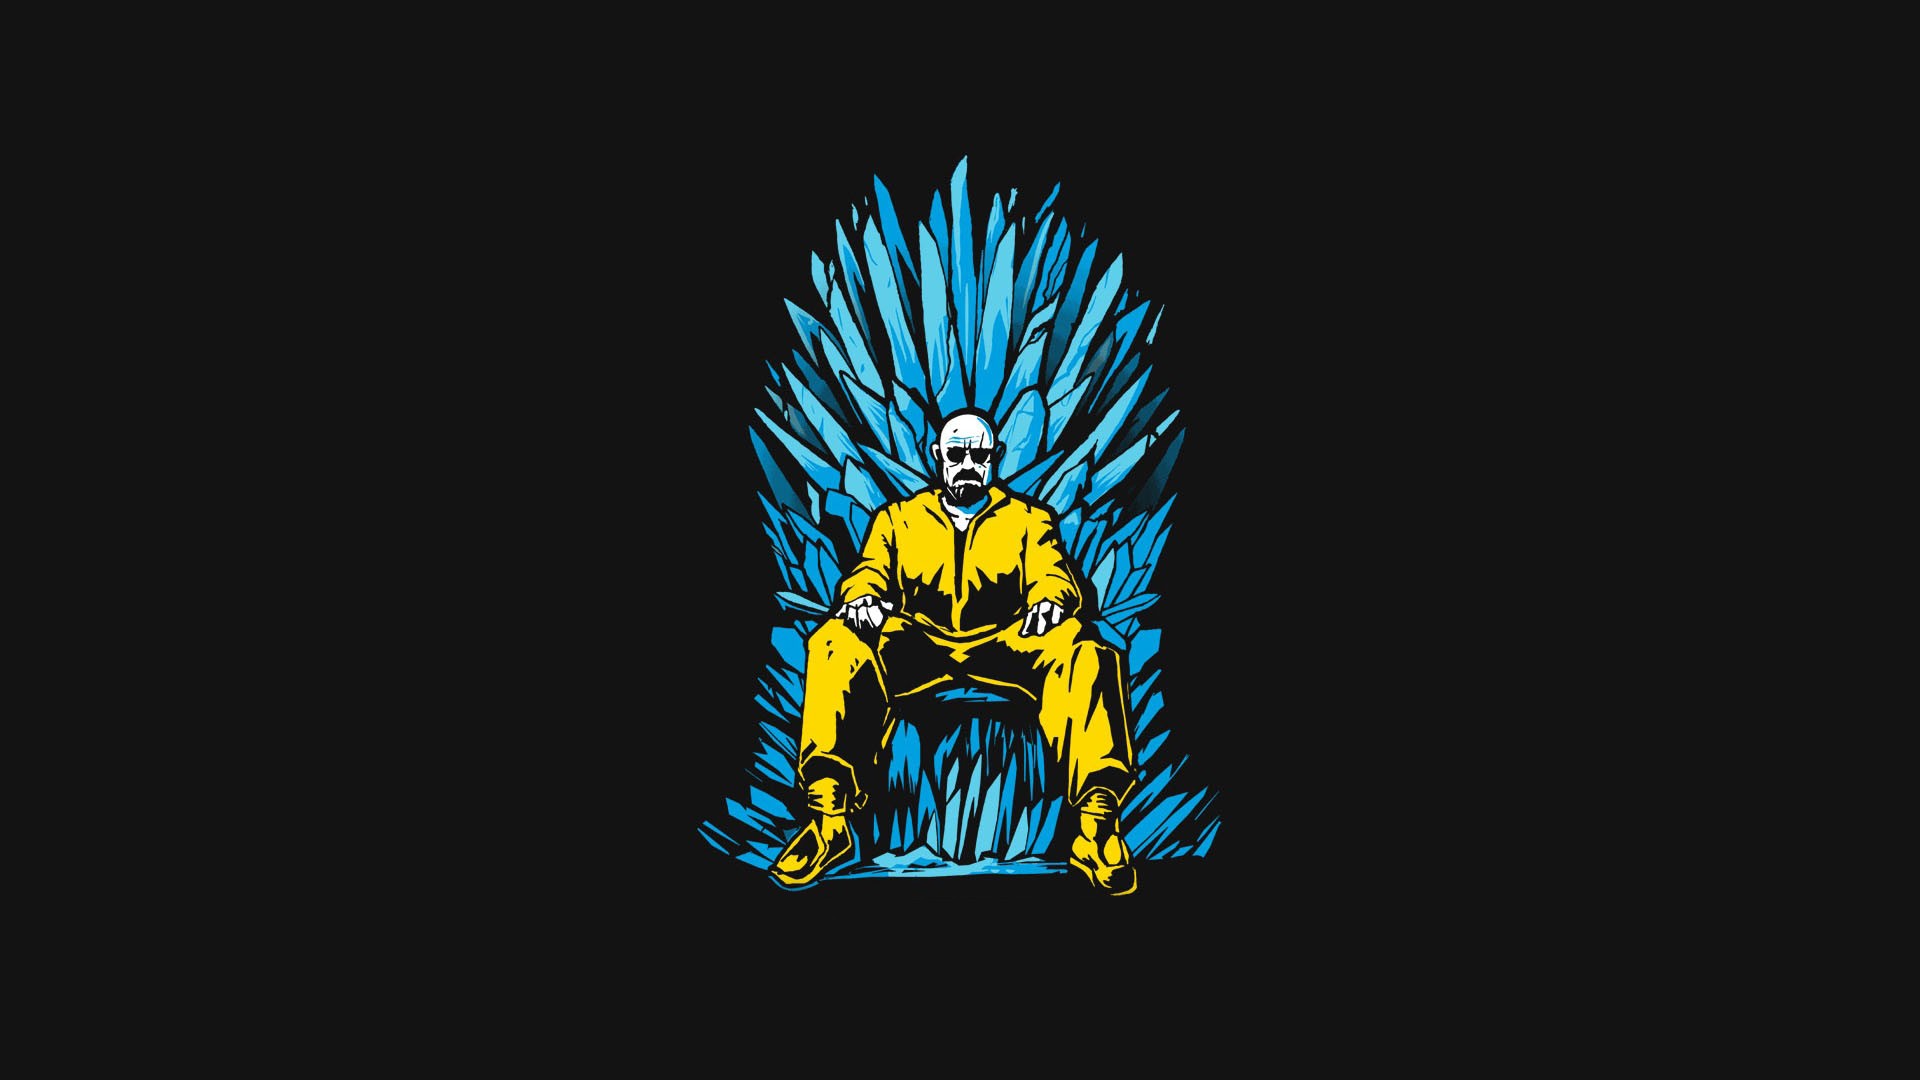 Walter White Game Of Thrones Throne Crossover Iron Throne Cyan Breaking Bad Yellow Black Background  1920x1080